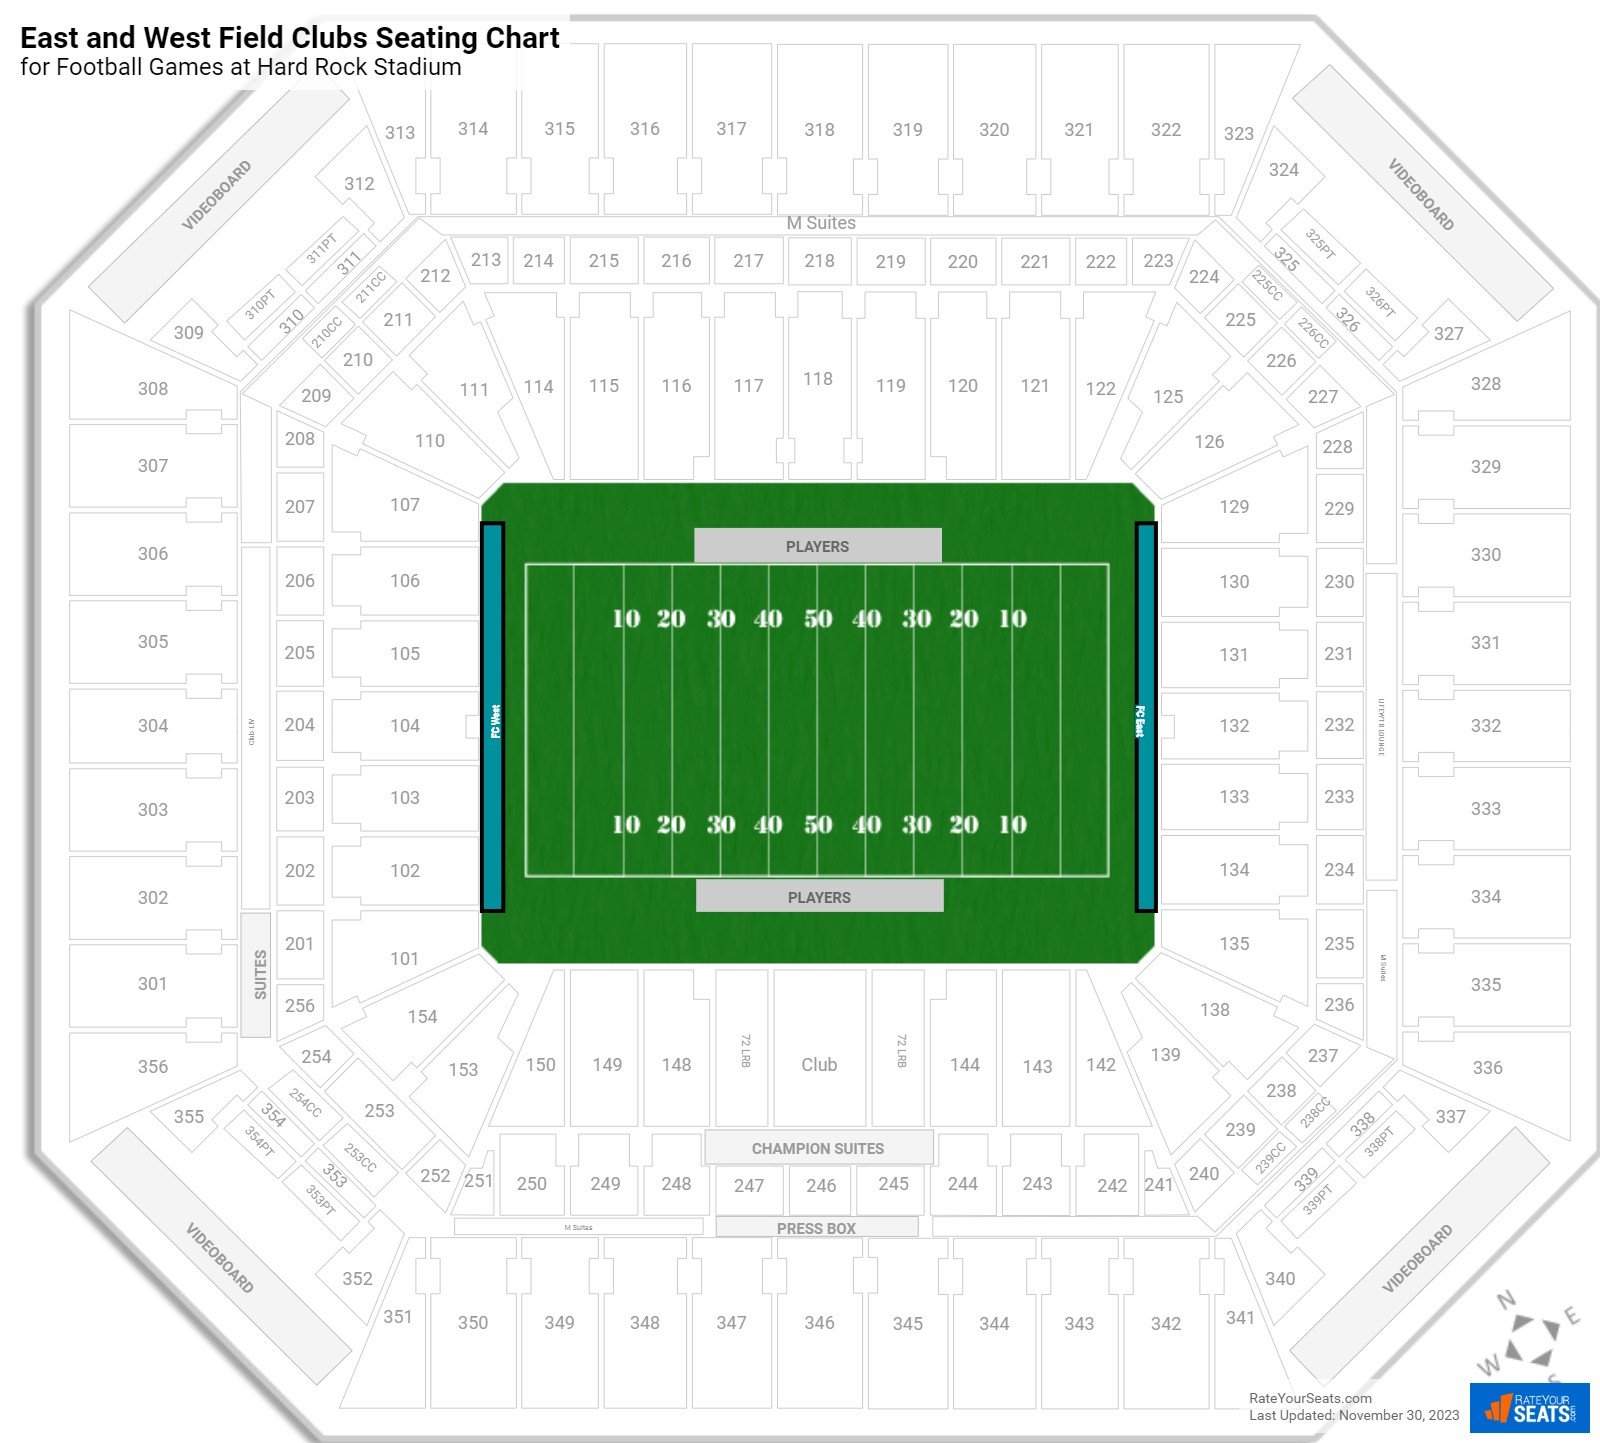 Football East and West Field Clubs Seating Chart at Hard Rock Stadium